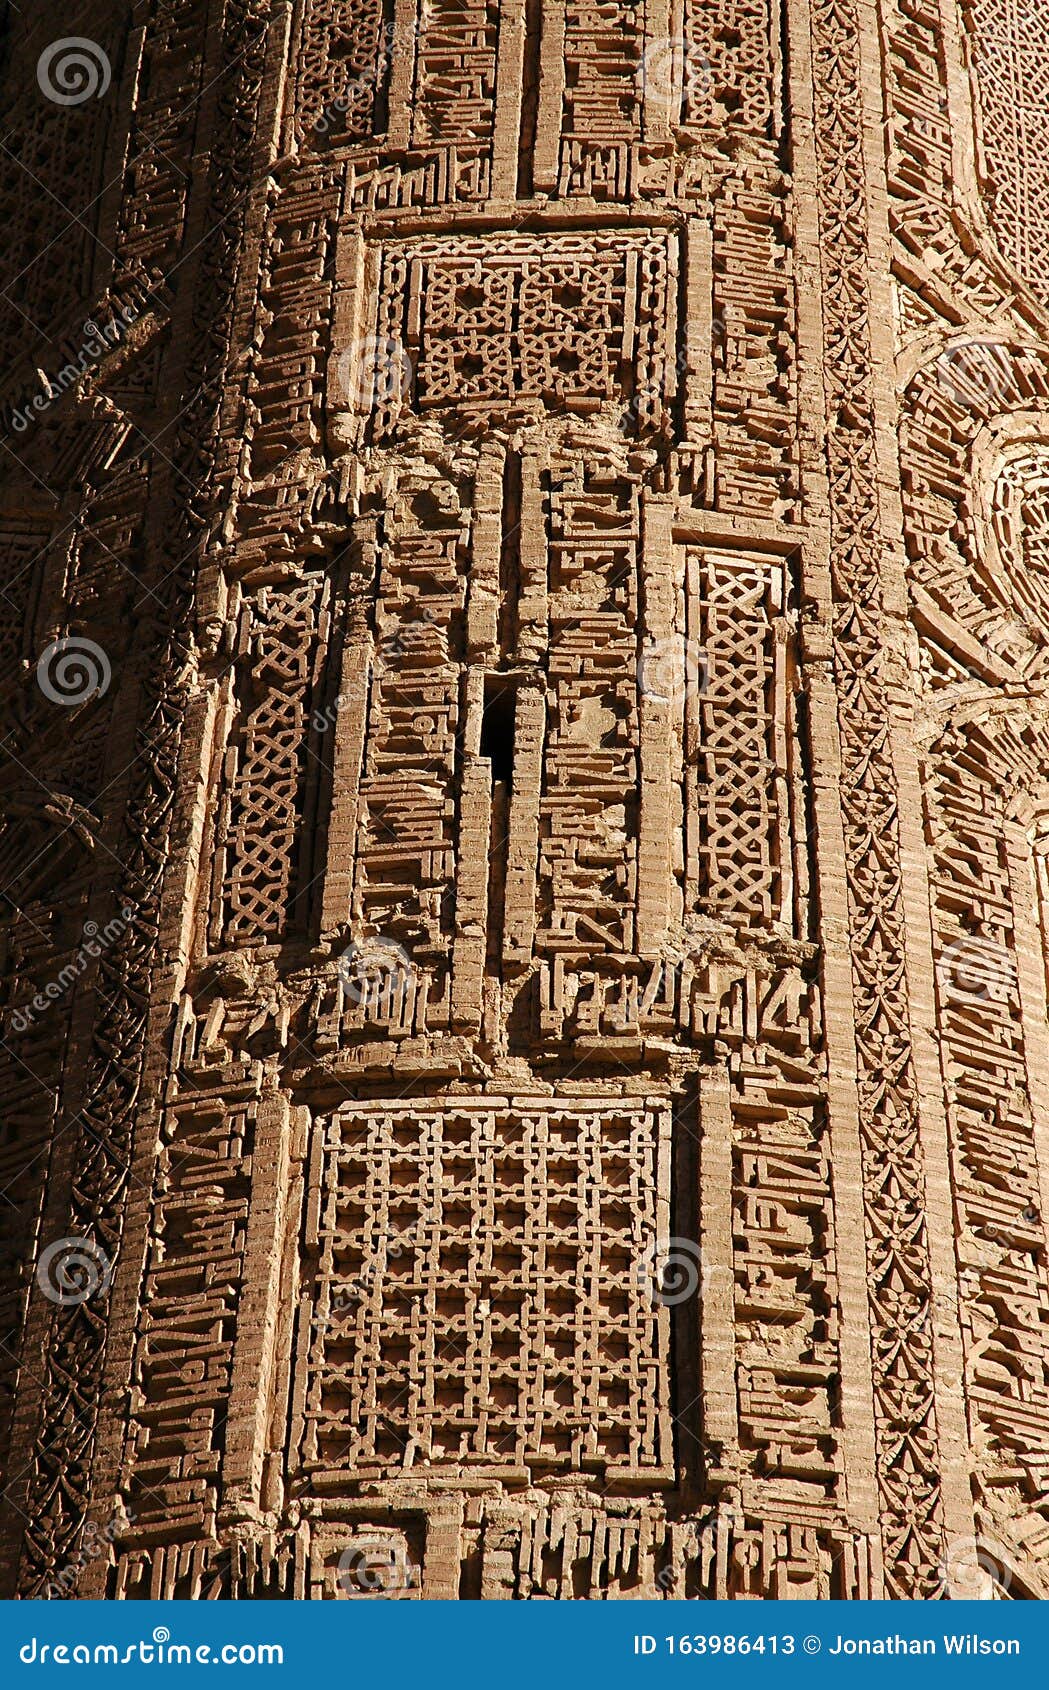 the minaret of jam, a unesco site in central afghanistan. showing detail of the geometric decorations.